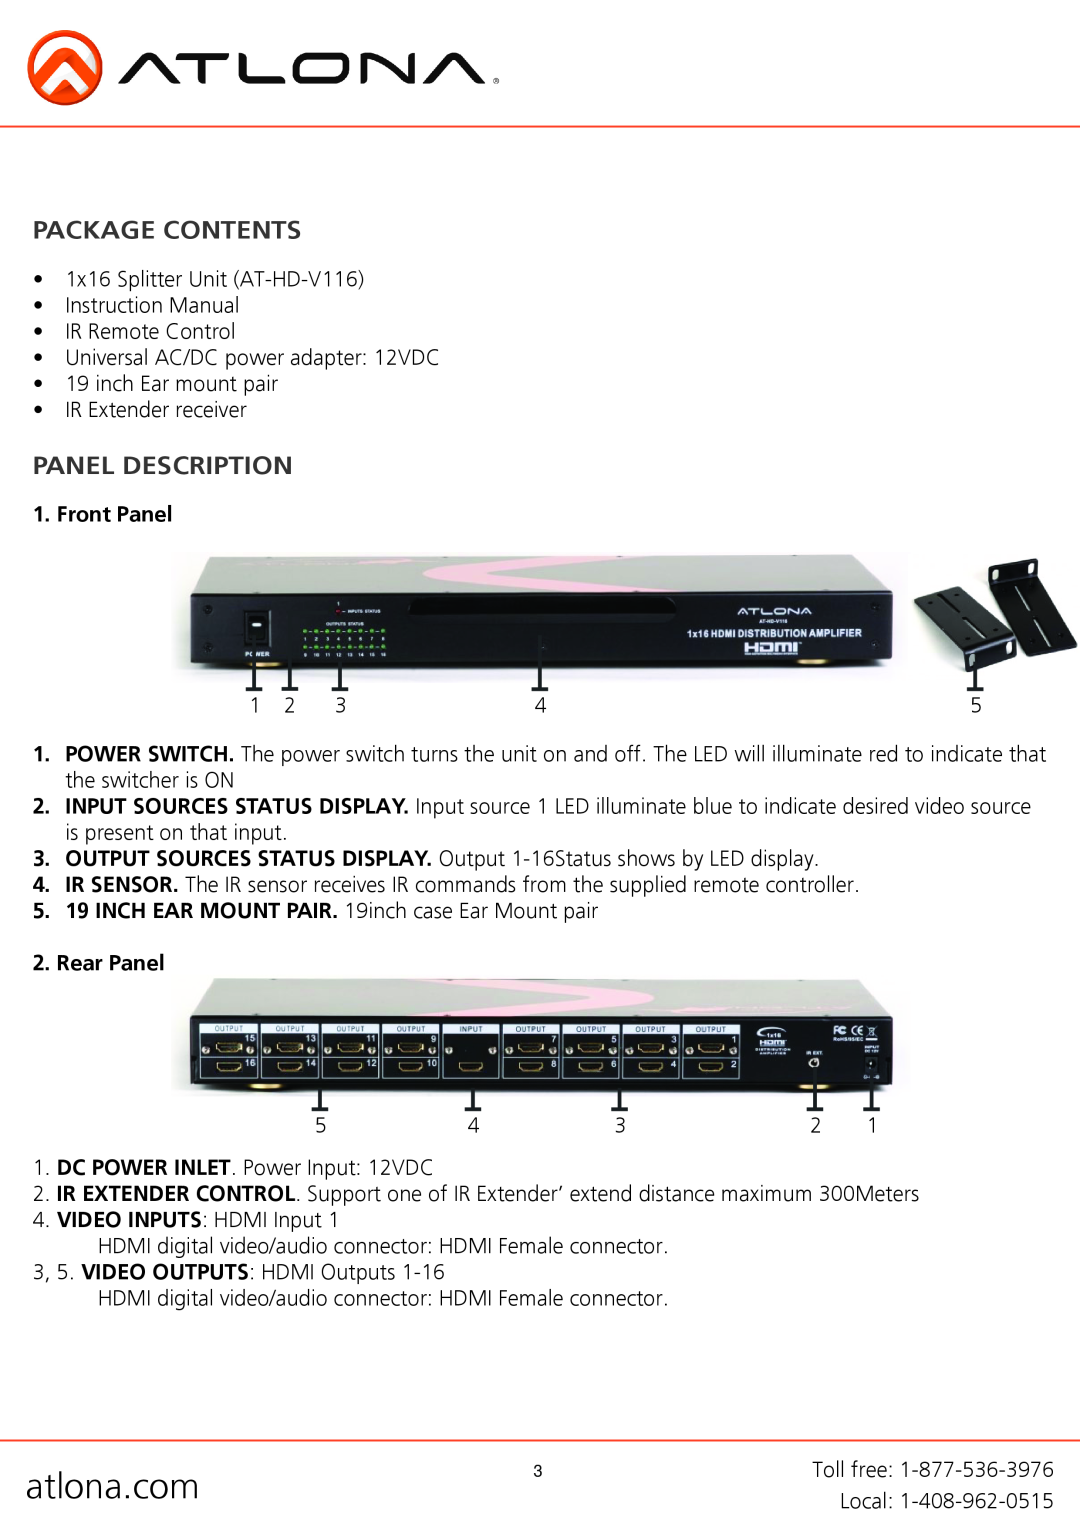 Atlona AT-HD-V116 user manual Package Contents, Panel Description, Front Panel, Rear Panel 